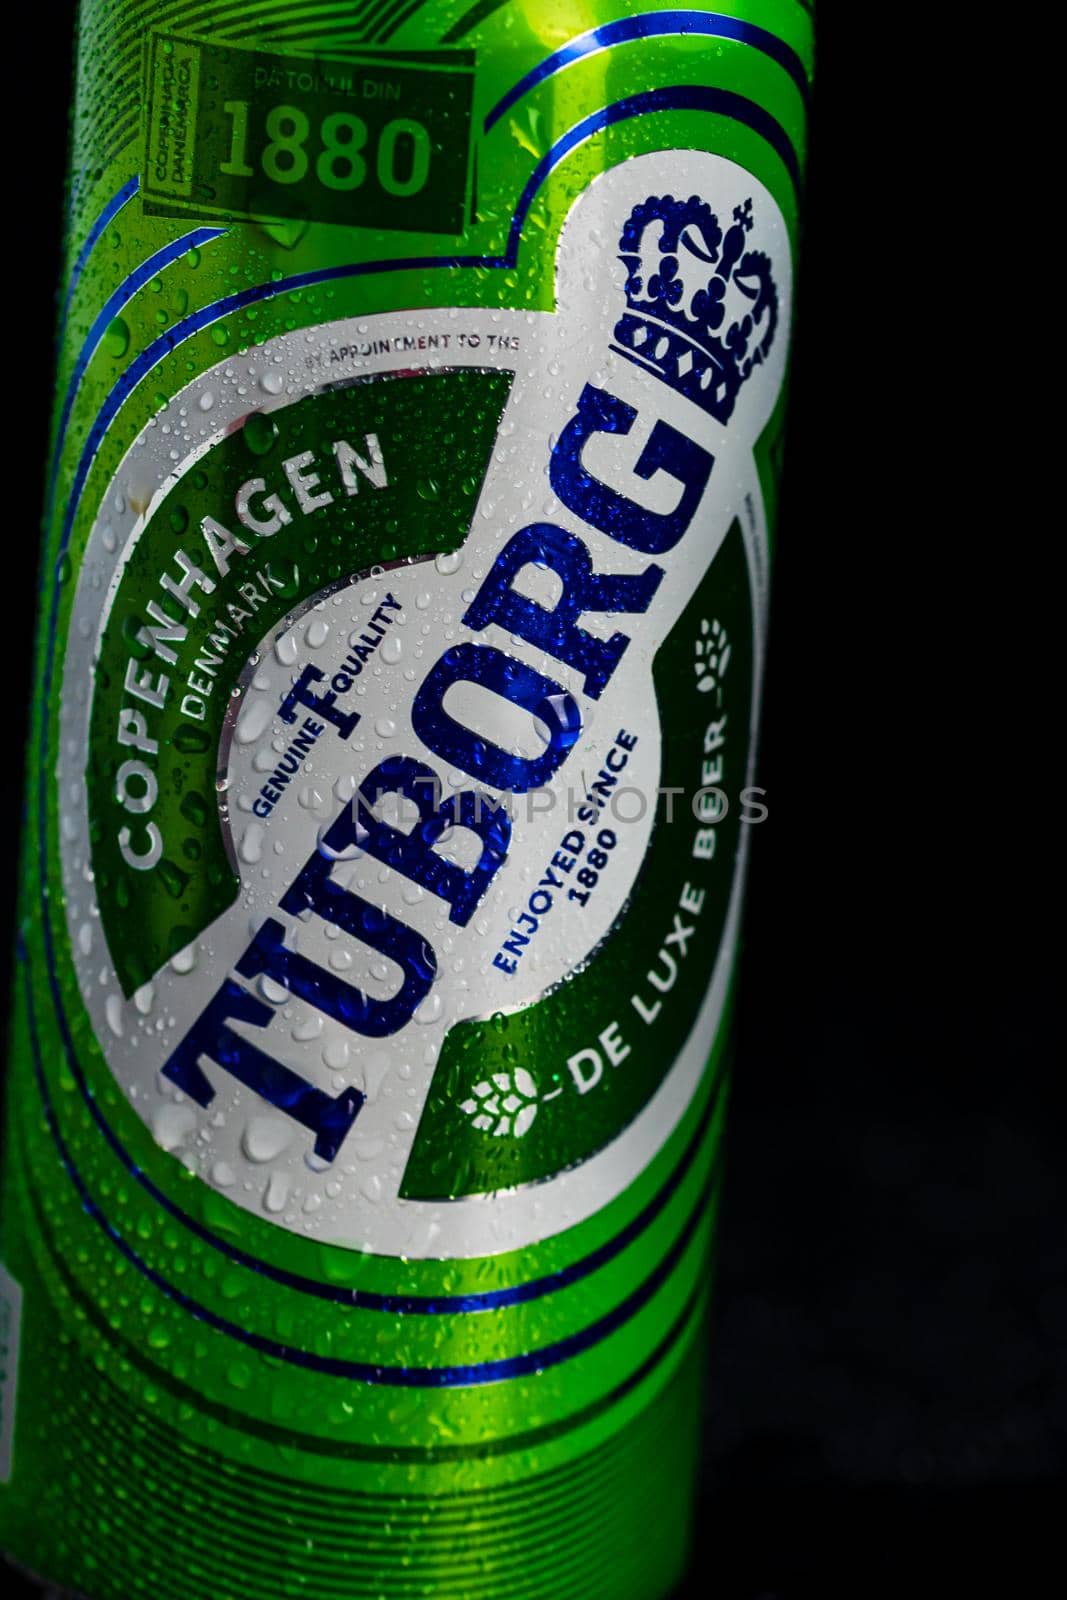 Condensation water droplets on Tuborg beer can isolated on black. Bucharest, Romania, 2020 by vladispas